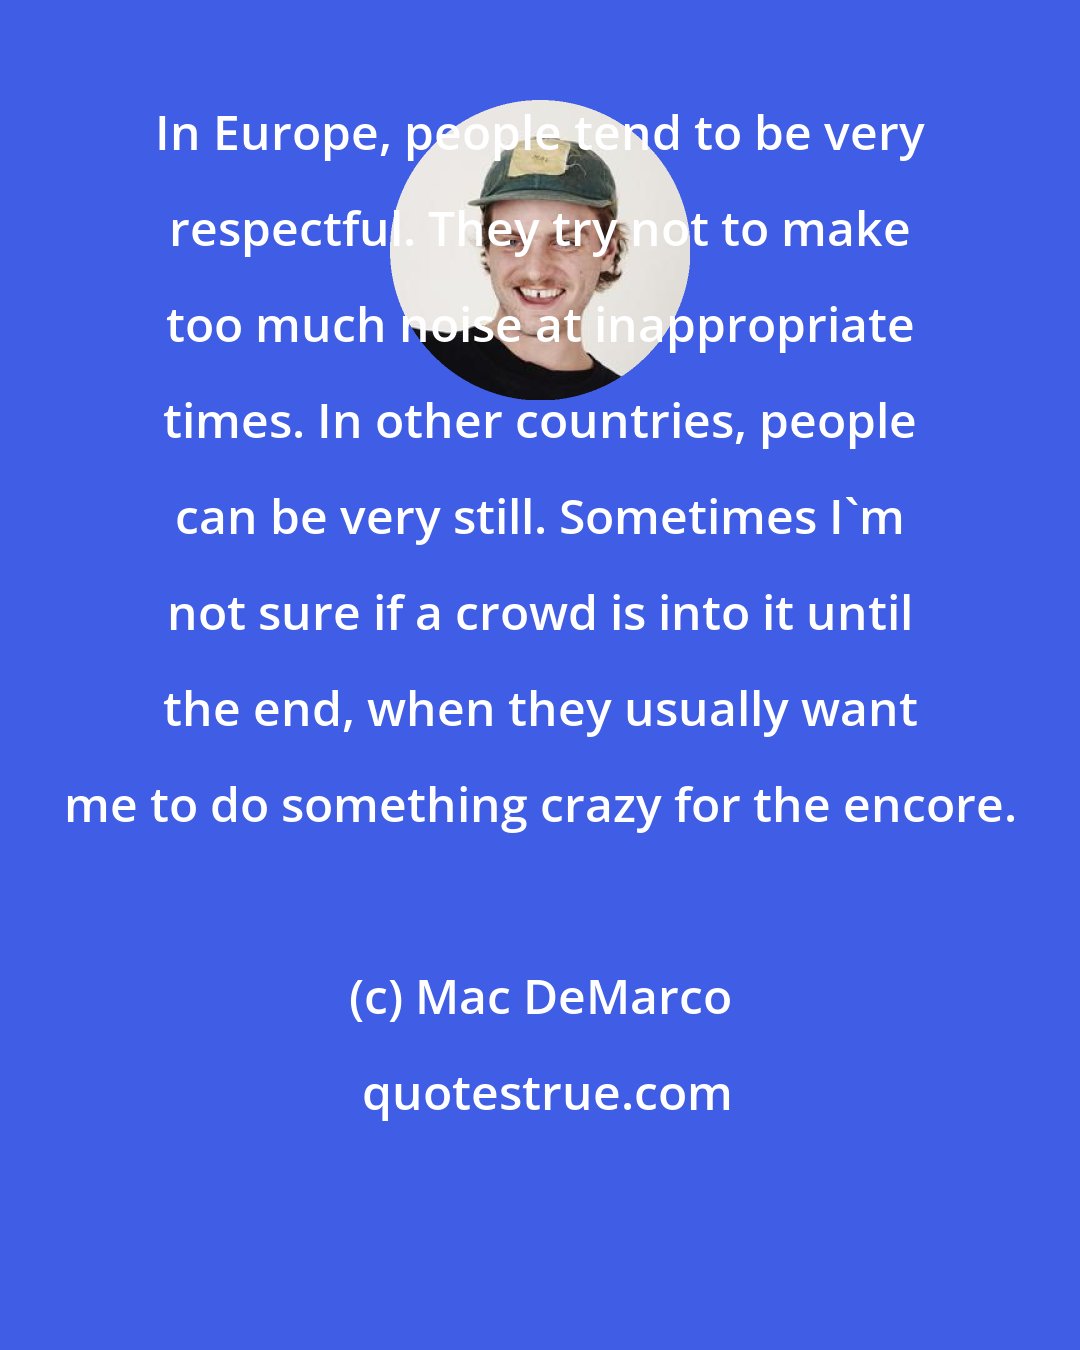 Mac DeMarco: In Europe, people tend to be very respectful. They try not to make too much noise at inappropriate times. In other countries, people can be very still. Sometimes I'm not sure if a crowd is into it until the end, when they usually want me to do something crazy for the encore.